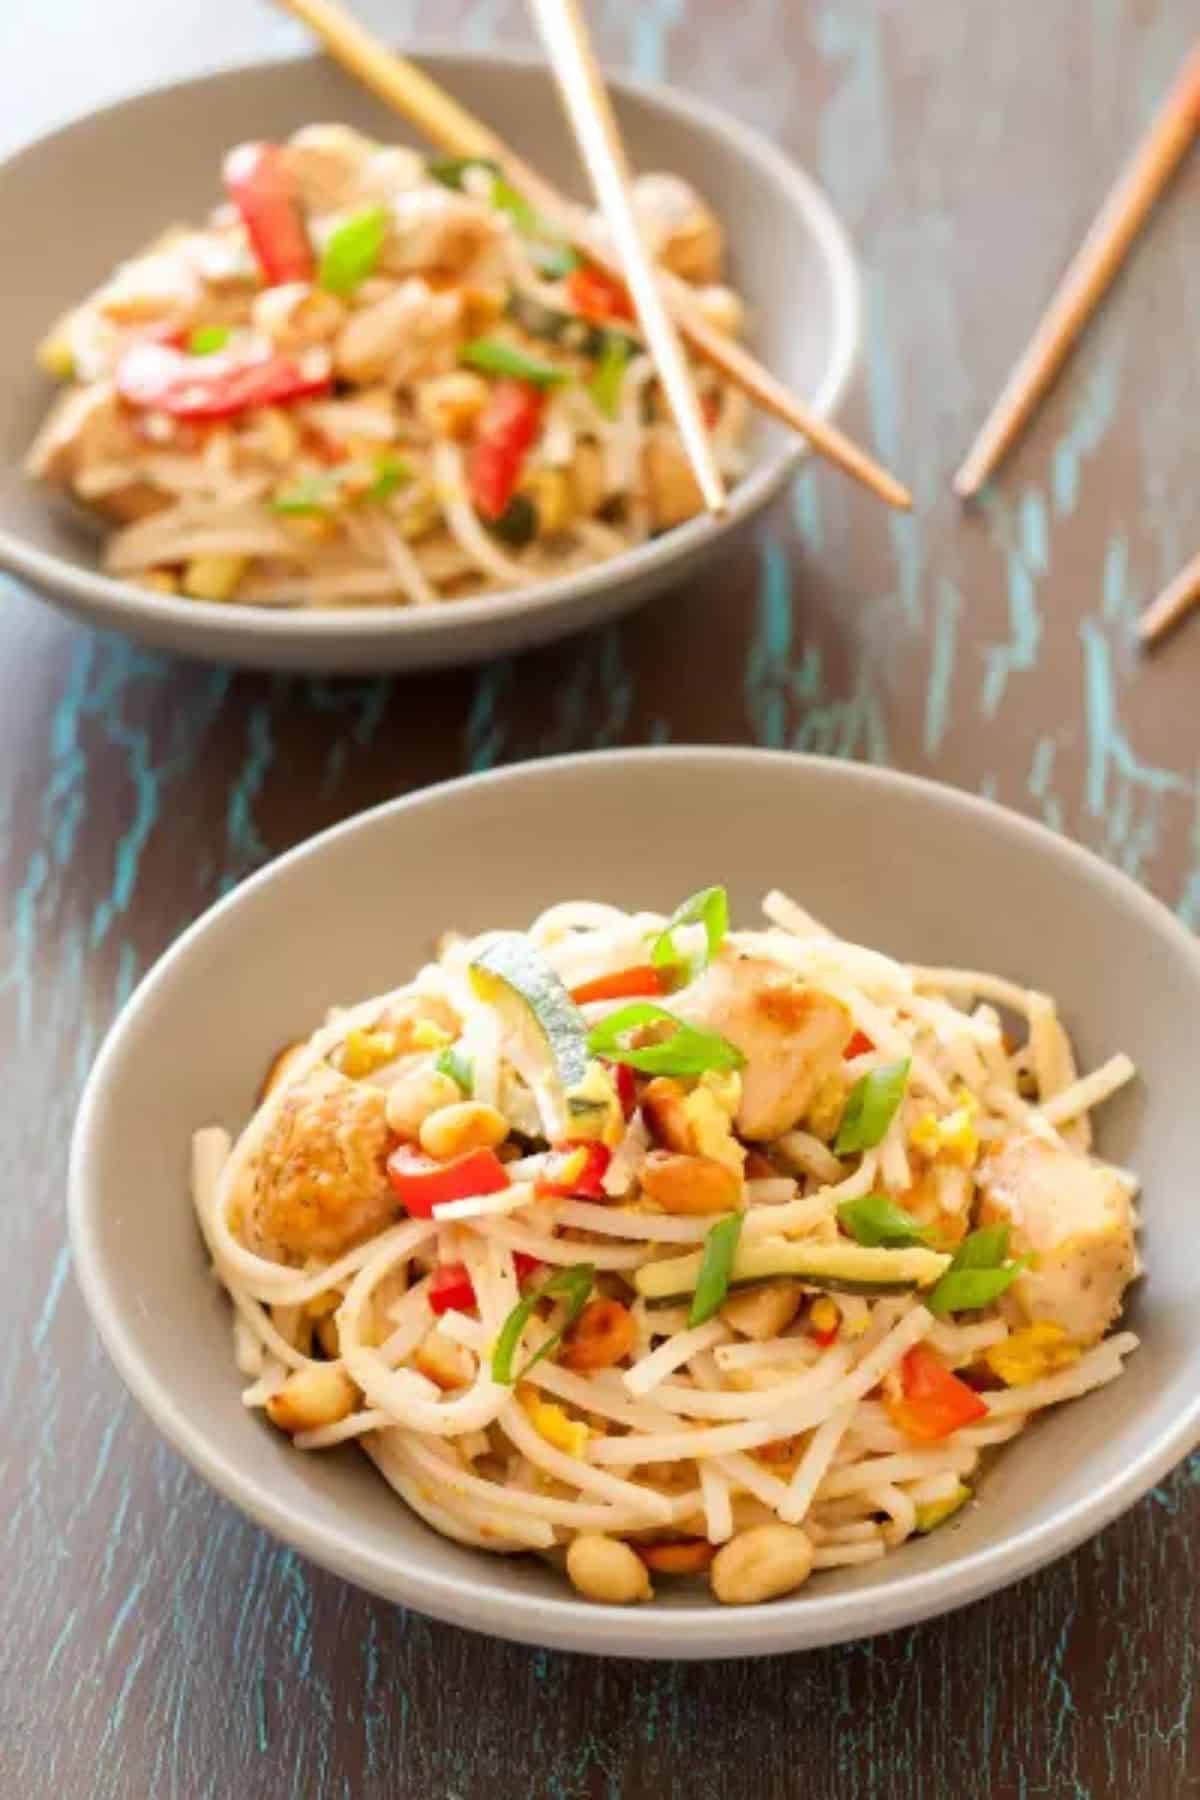 Delicious Gluten-Free Pad Thai in two gray bowls.